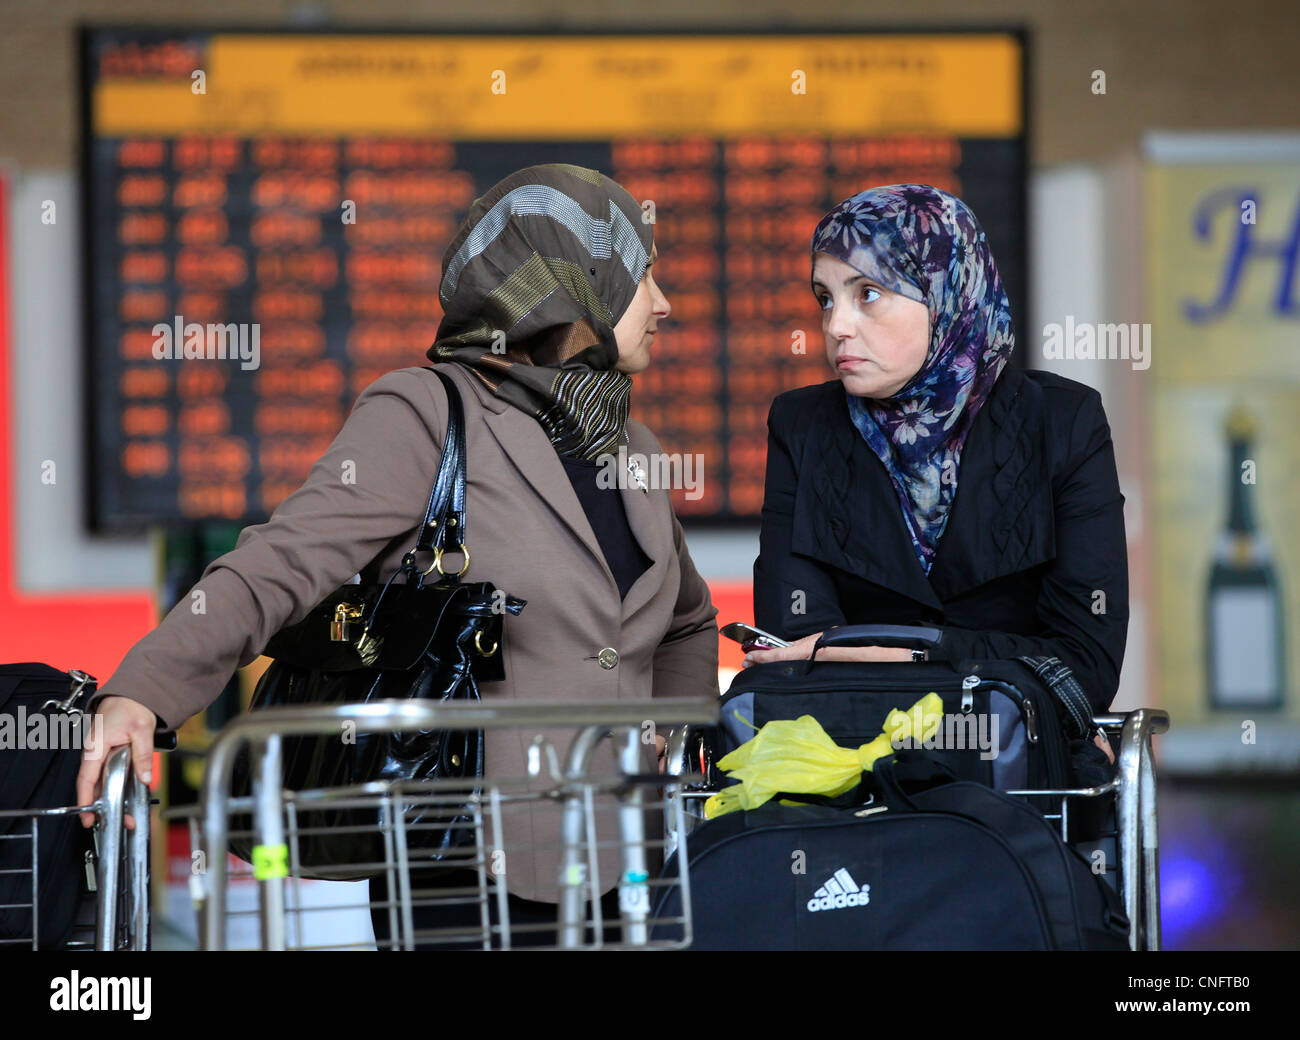 Palestinian passengers in Ben Gurion Airport widely known as Lod Airport in Israel Stock Photo